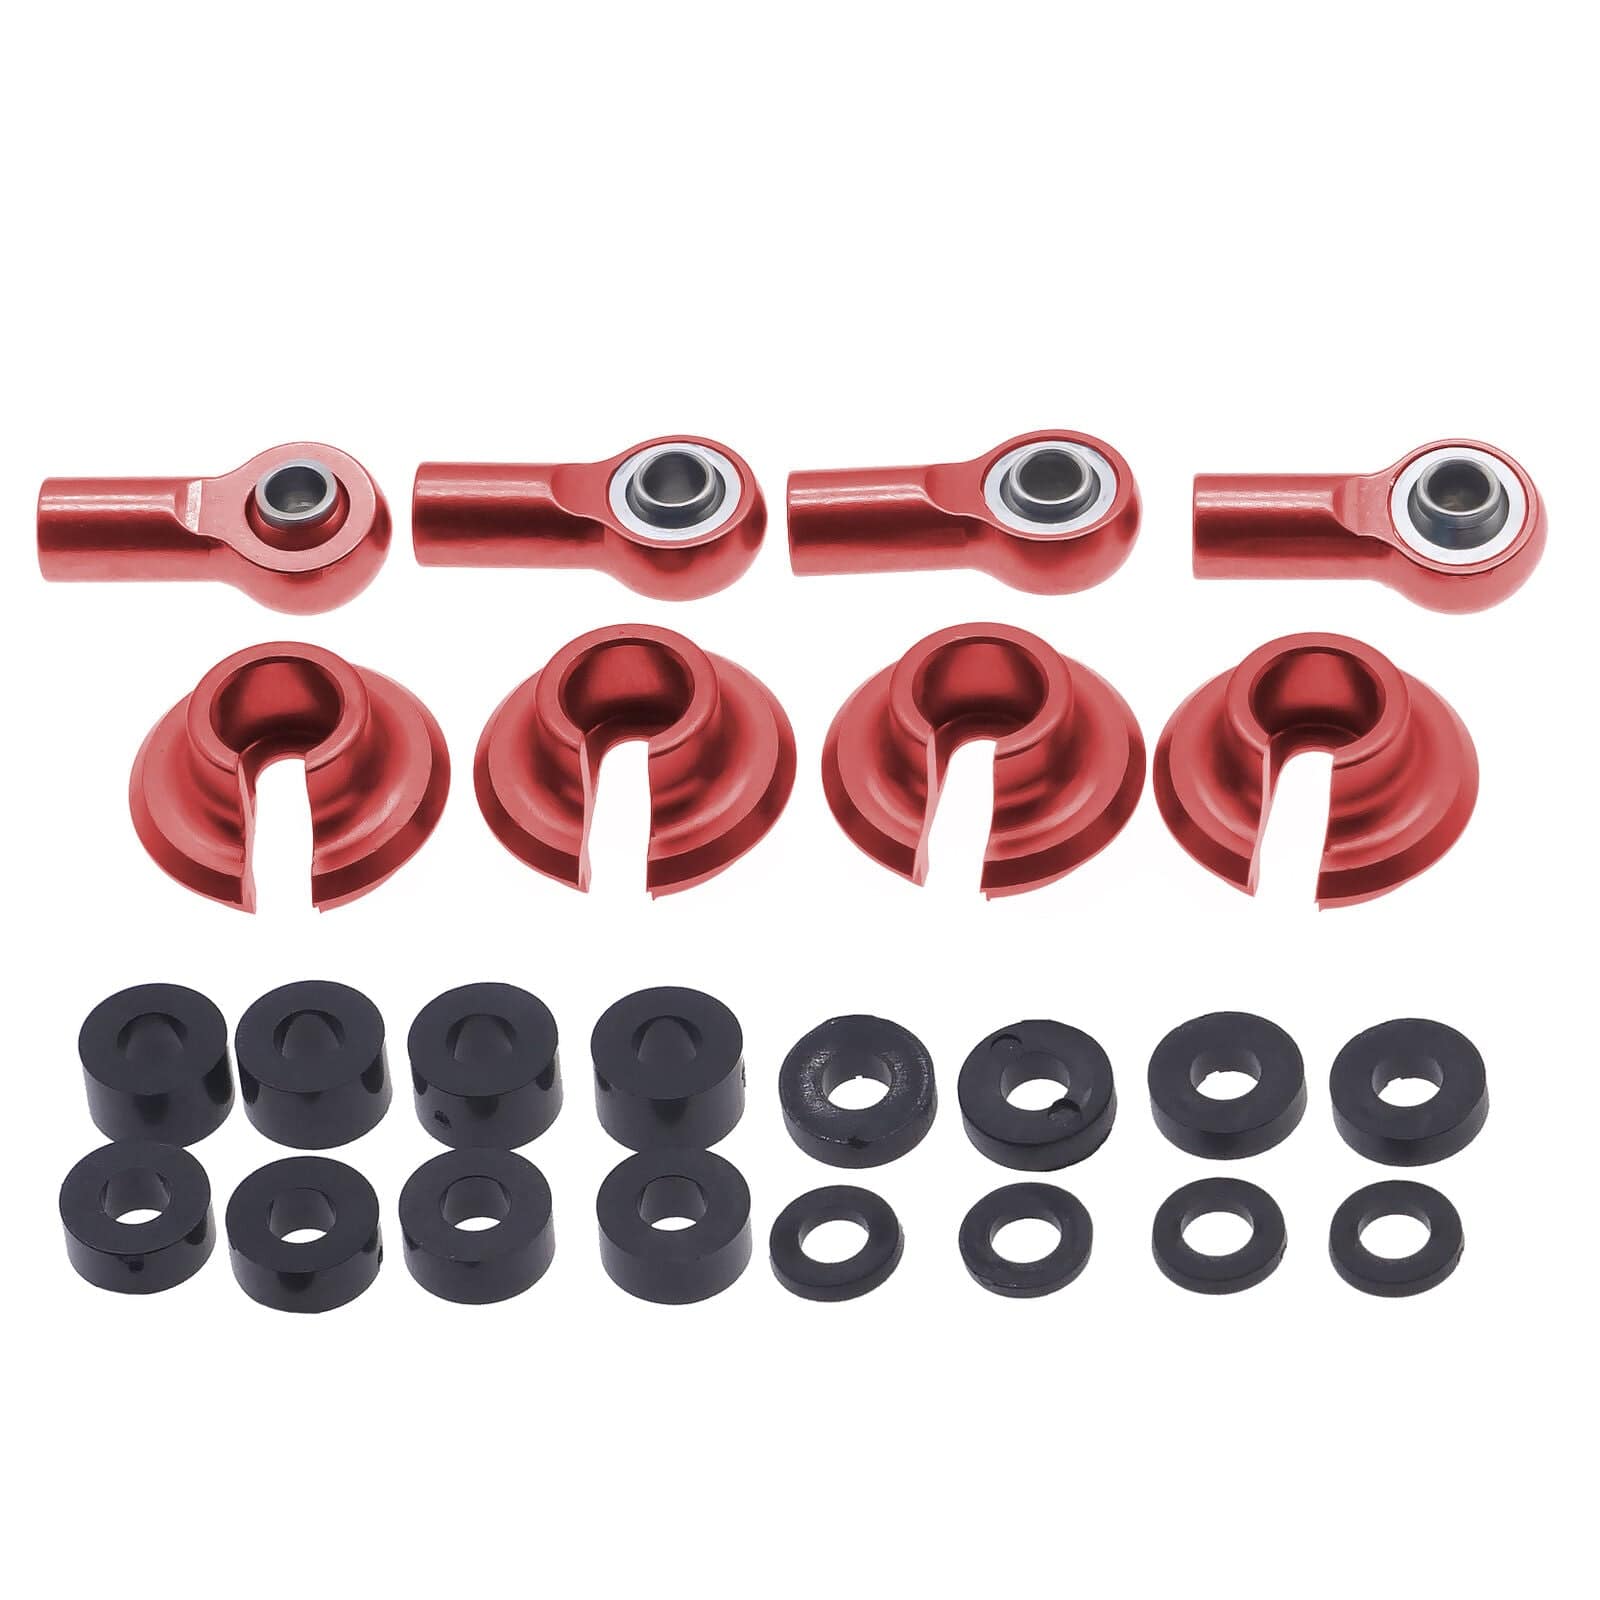 RCAWD ECX UPGRADE PARTS RCAWD Shock Ends Spring Cups Spring Clips for 1/10 ECX 2WD Series